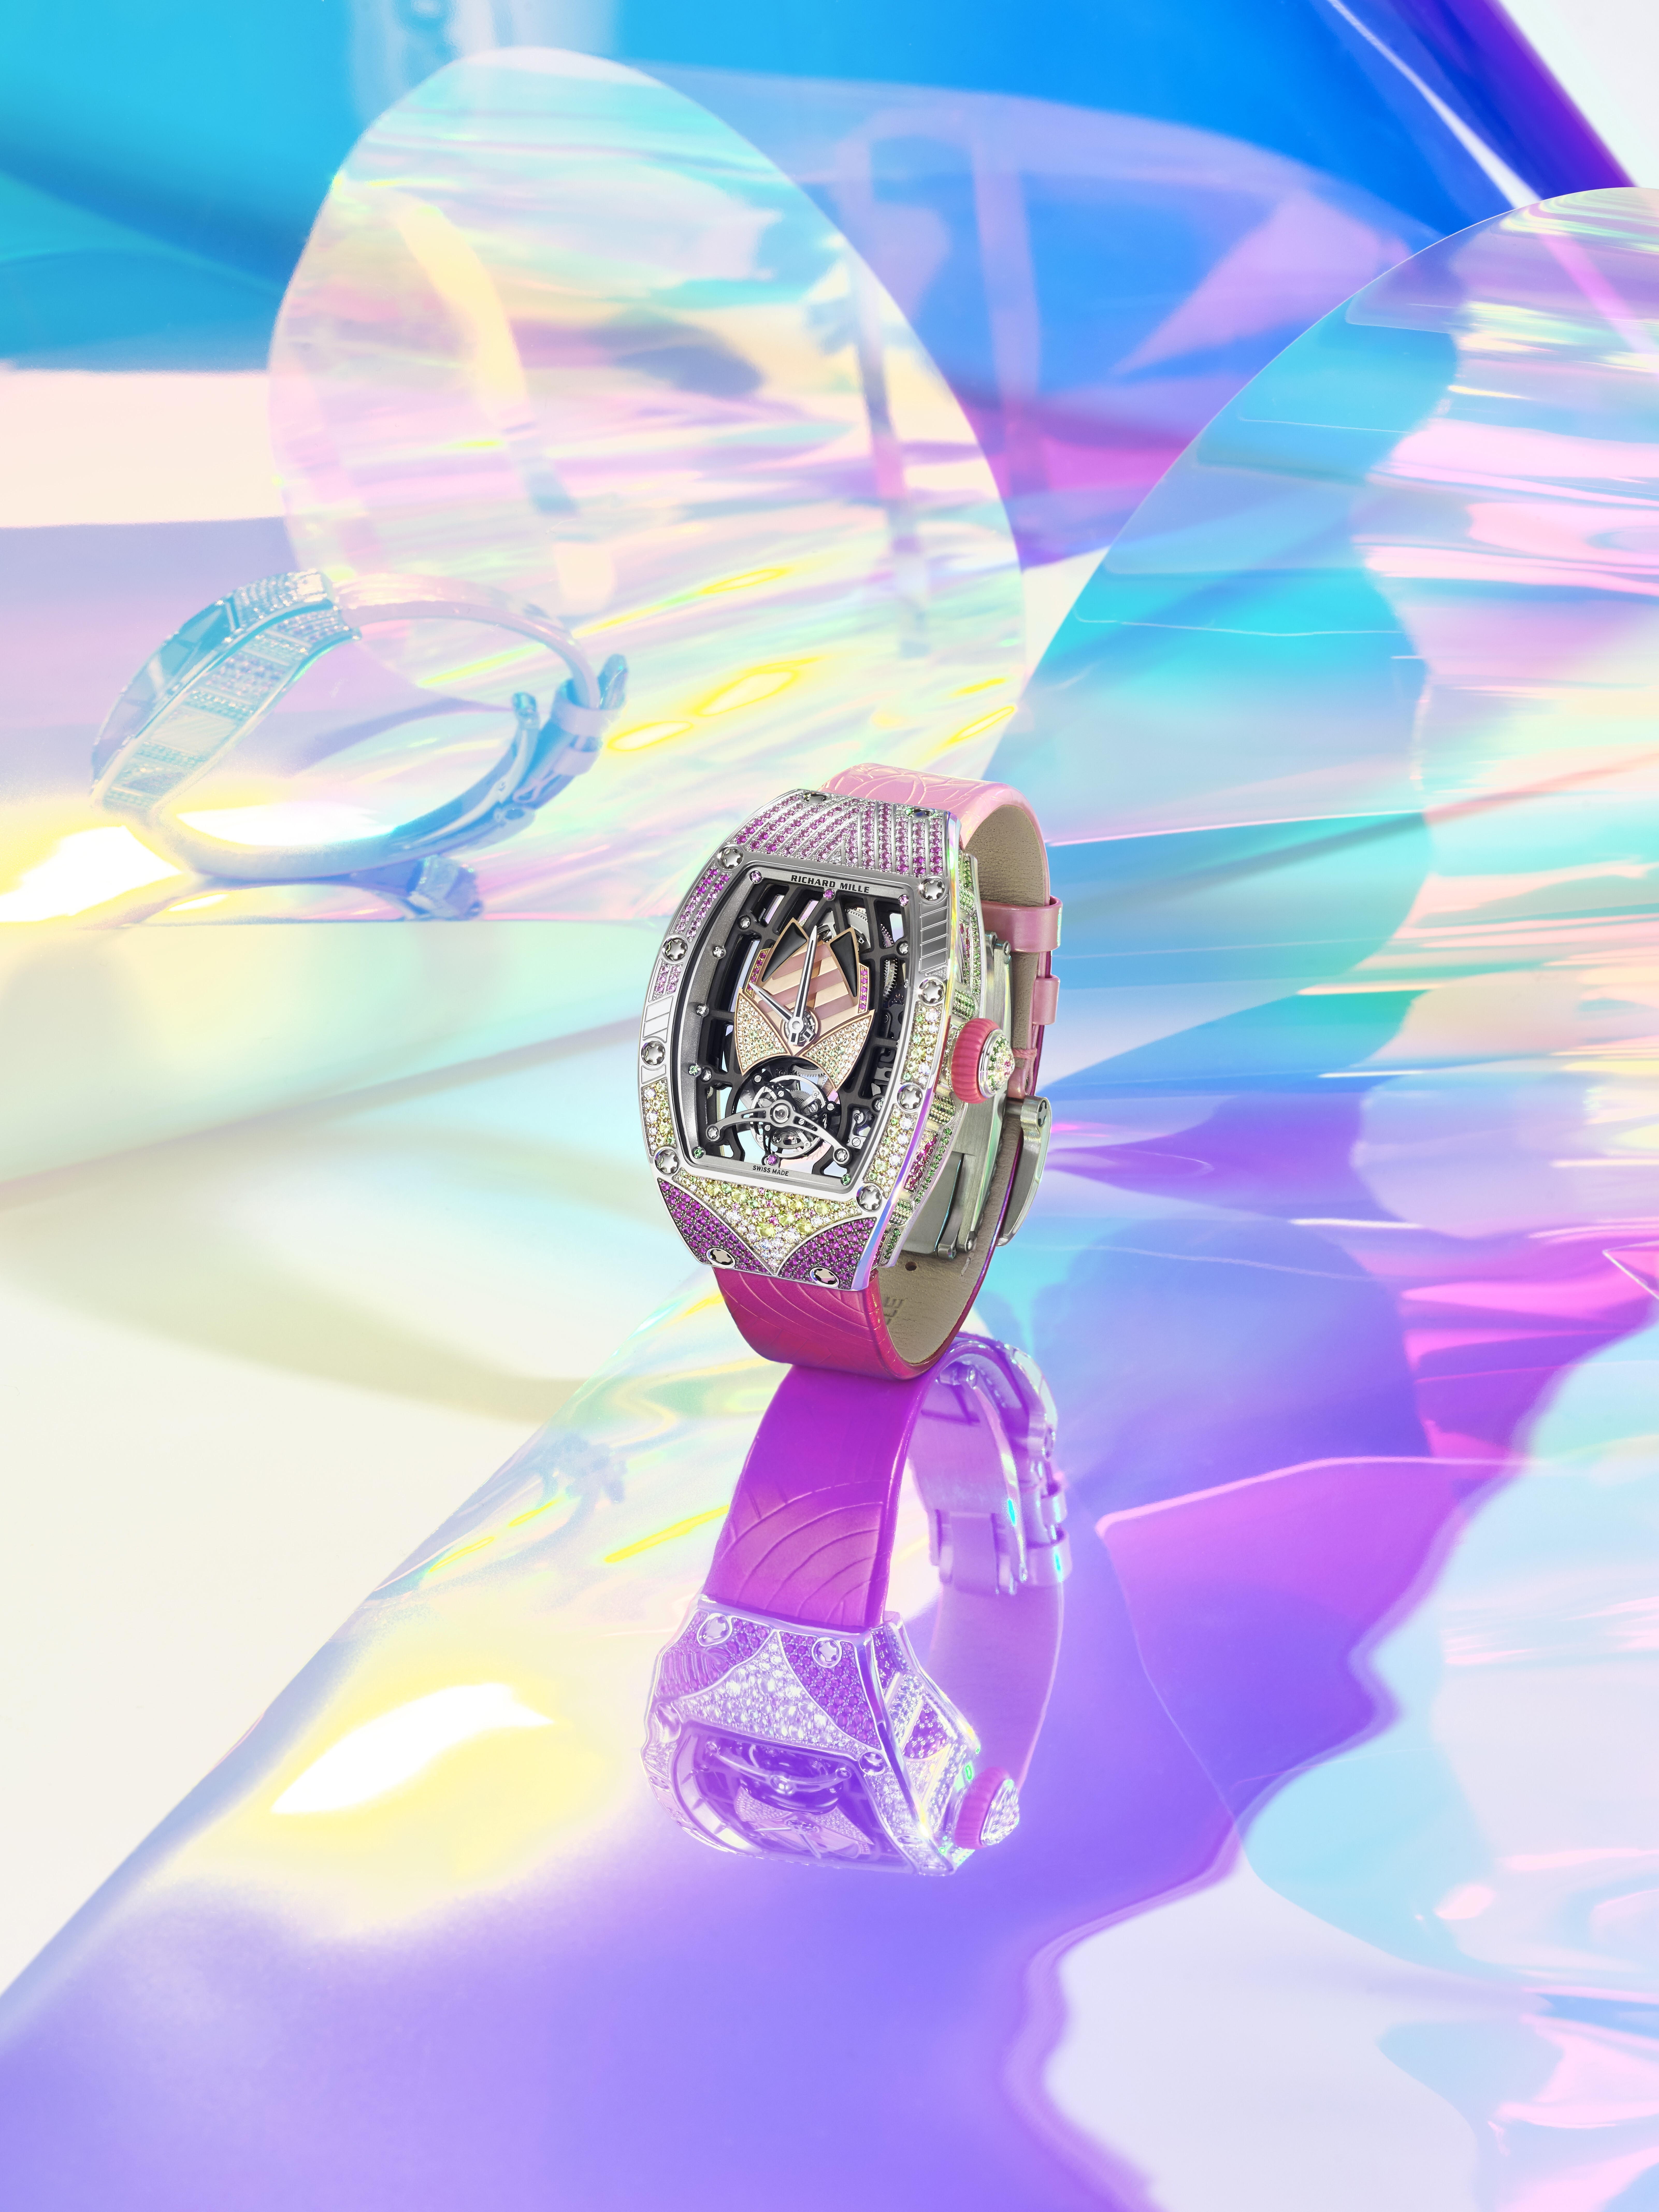 Richard Mille’s Bianca watch was designed to evoke the disco era of the 1970s. Photo: Lilas Lequellec